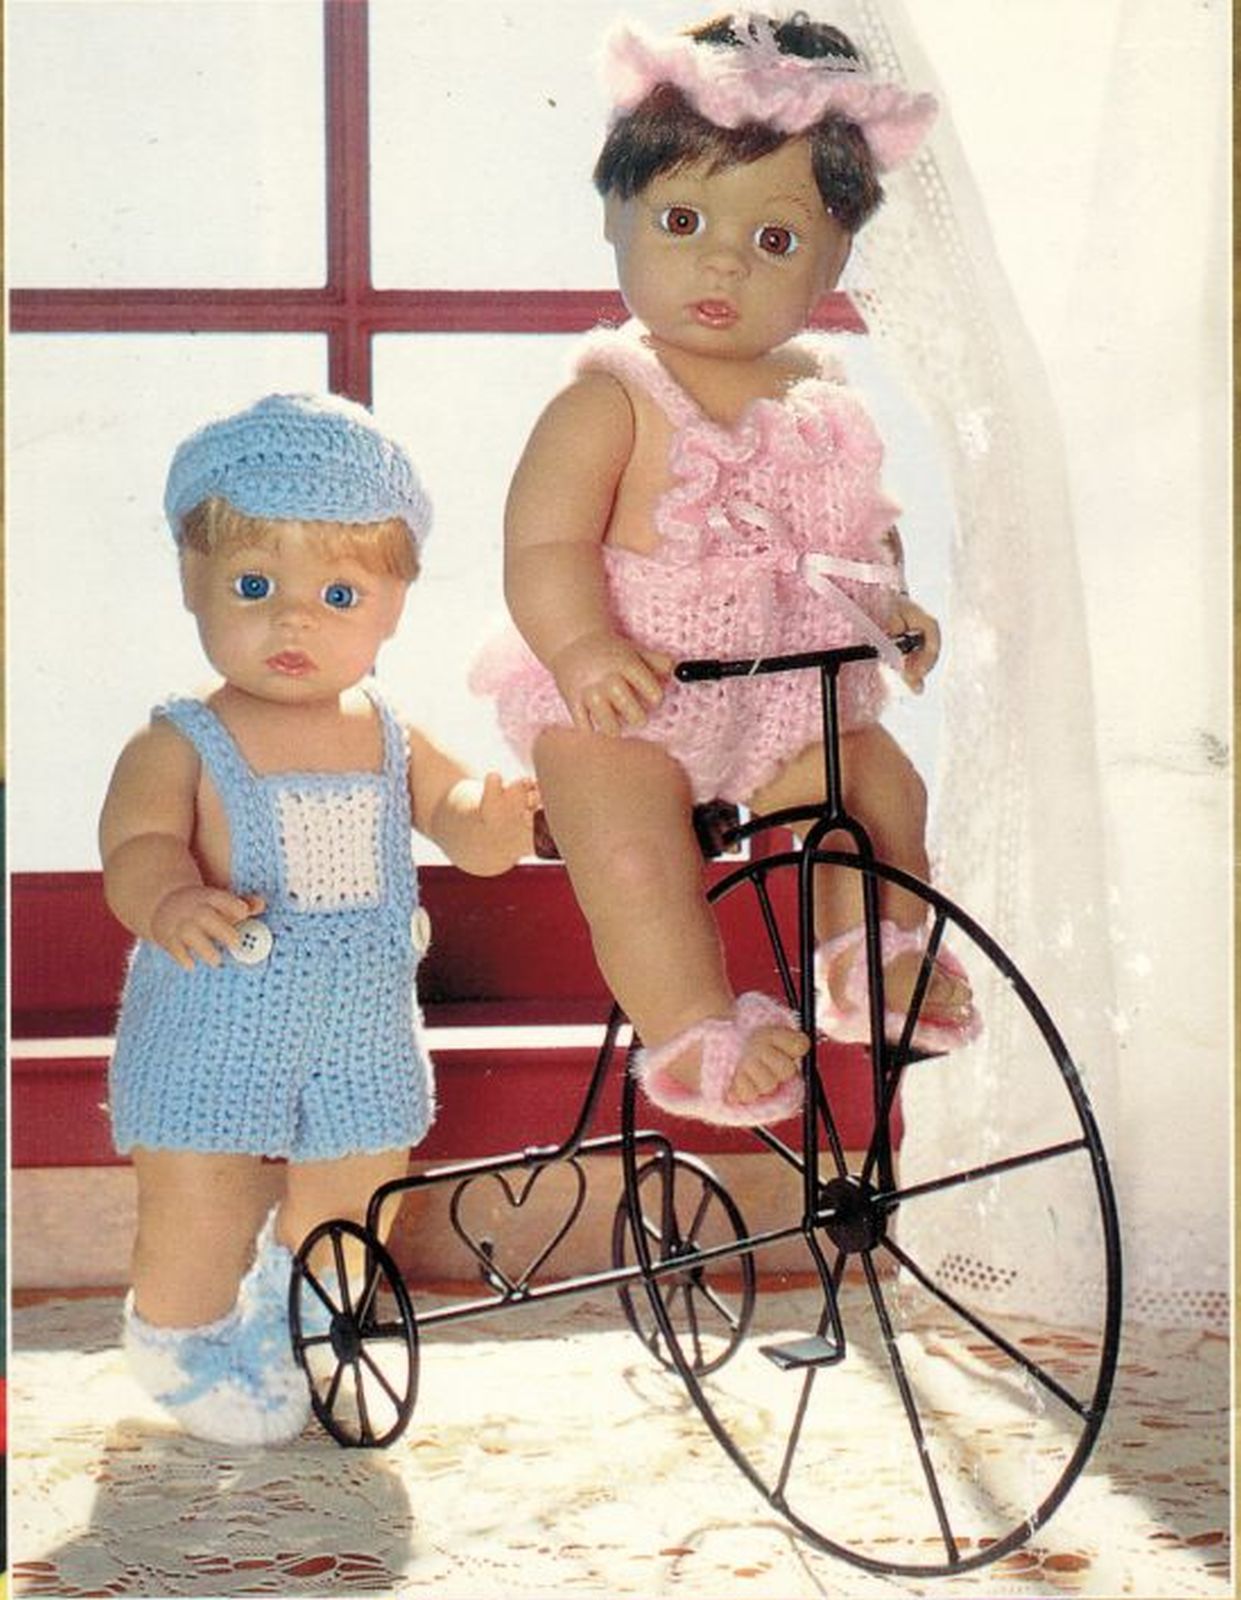 14" Syndee's Crafts Doll Clothes Sun & Play Suits Romper Dress Crochet Patterns - $15.99